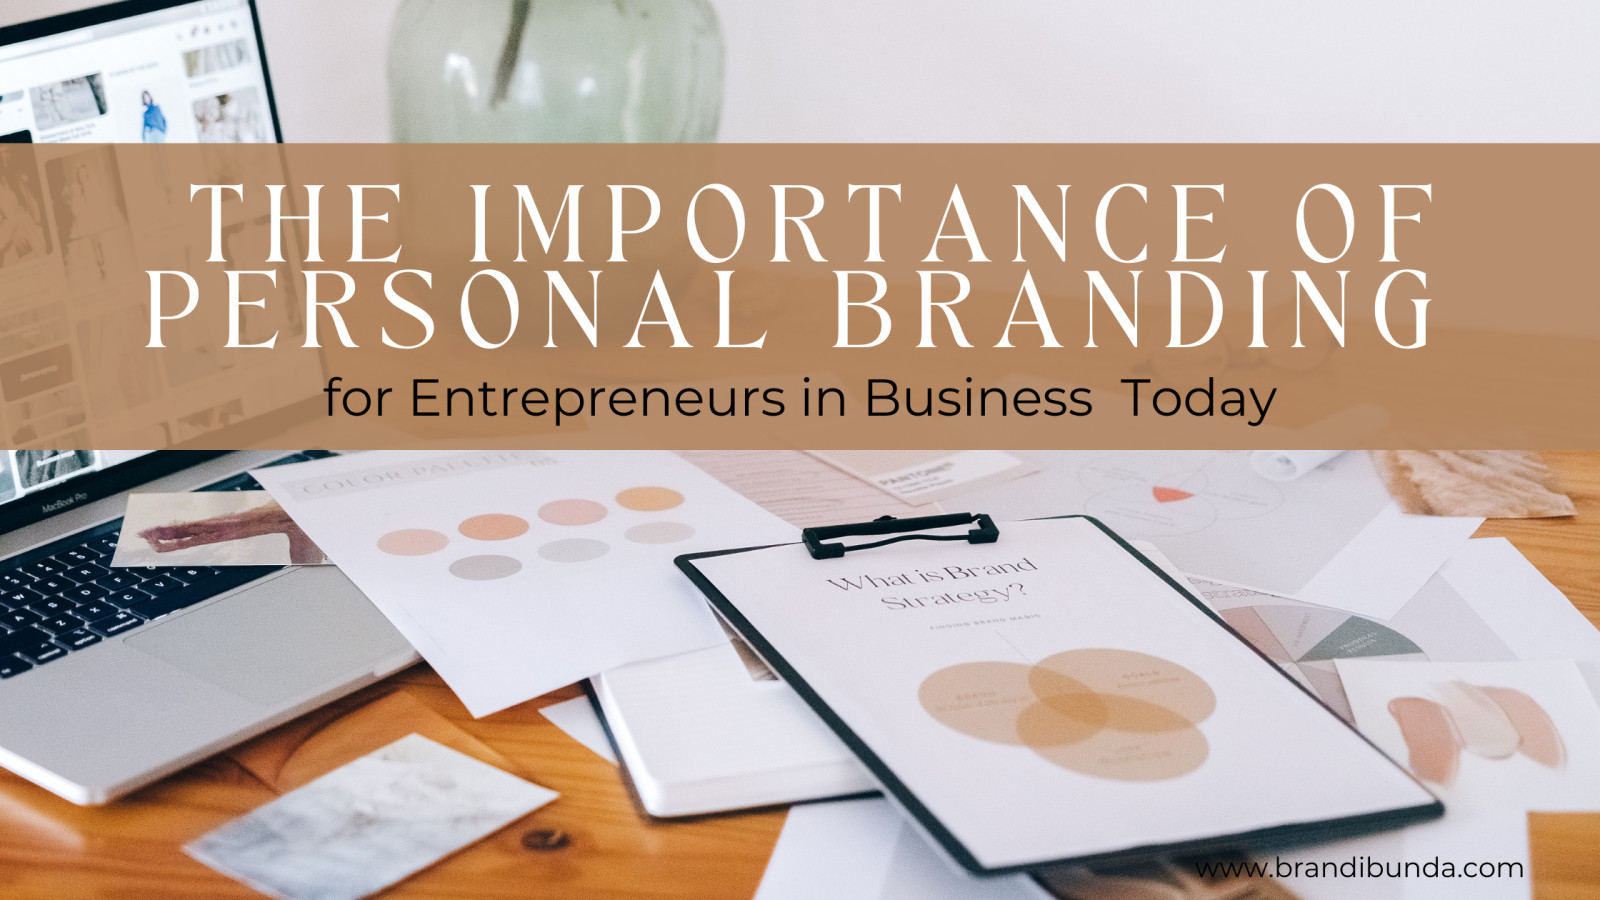 The Importance of Personal Branding for Entrepreneurs in Business Today